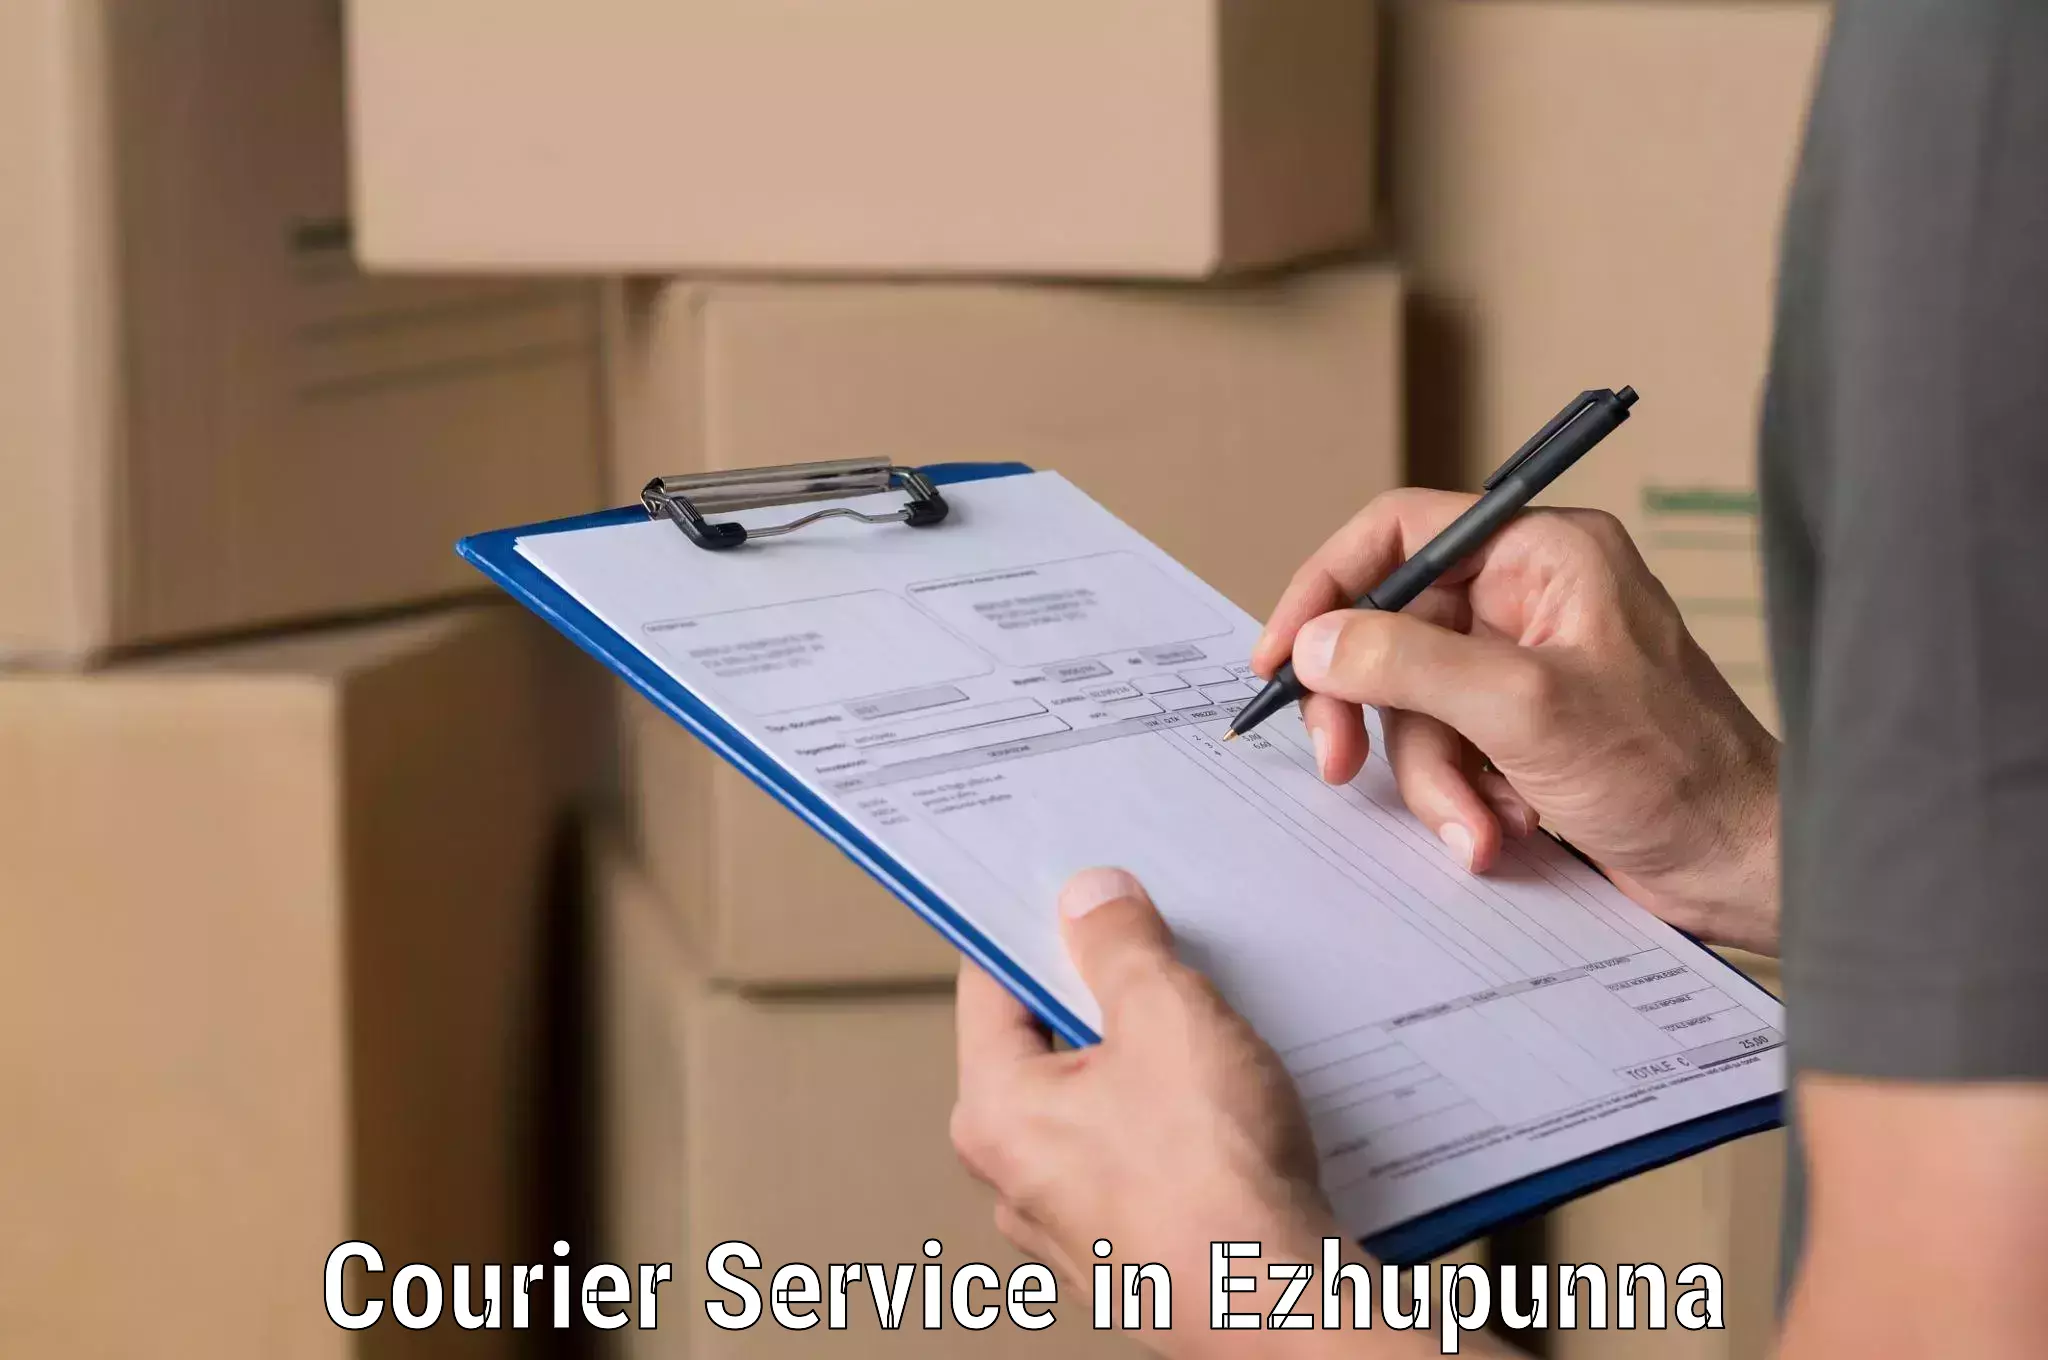 Subscription-based courier in Ezhupunna